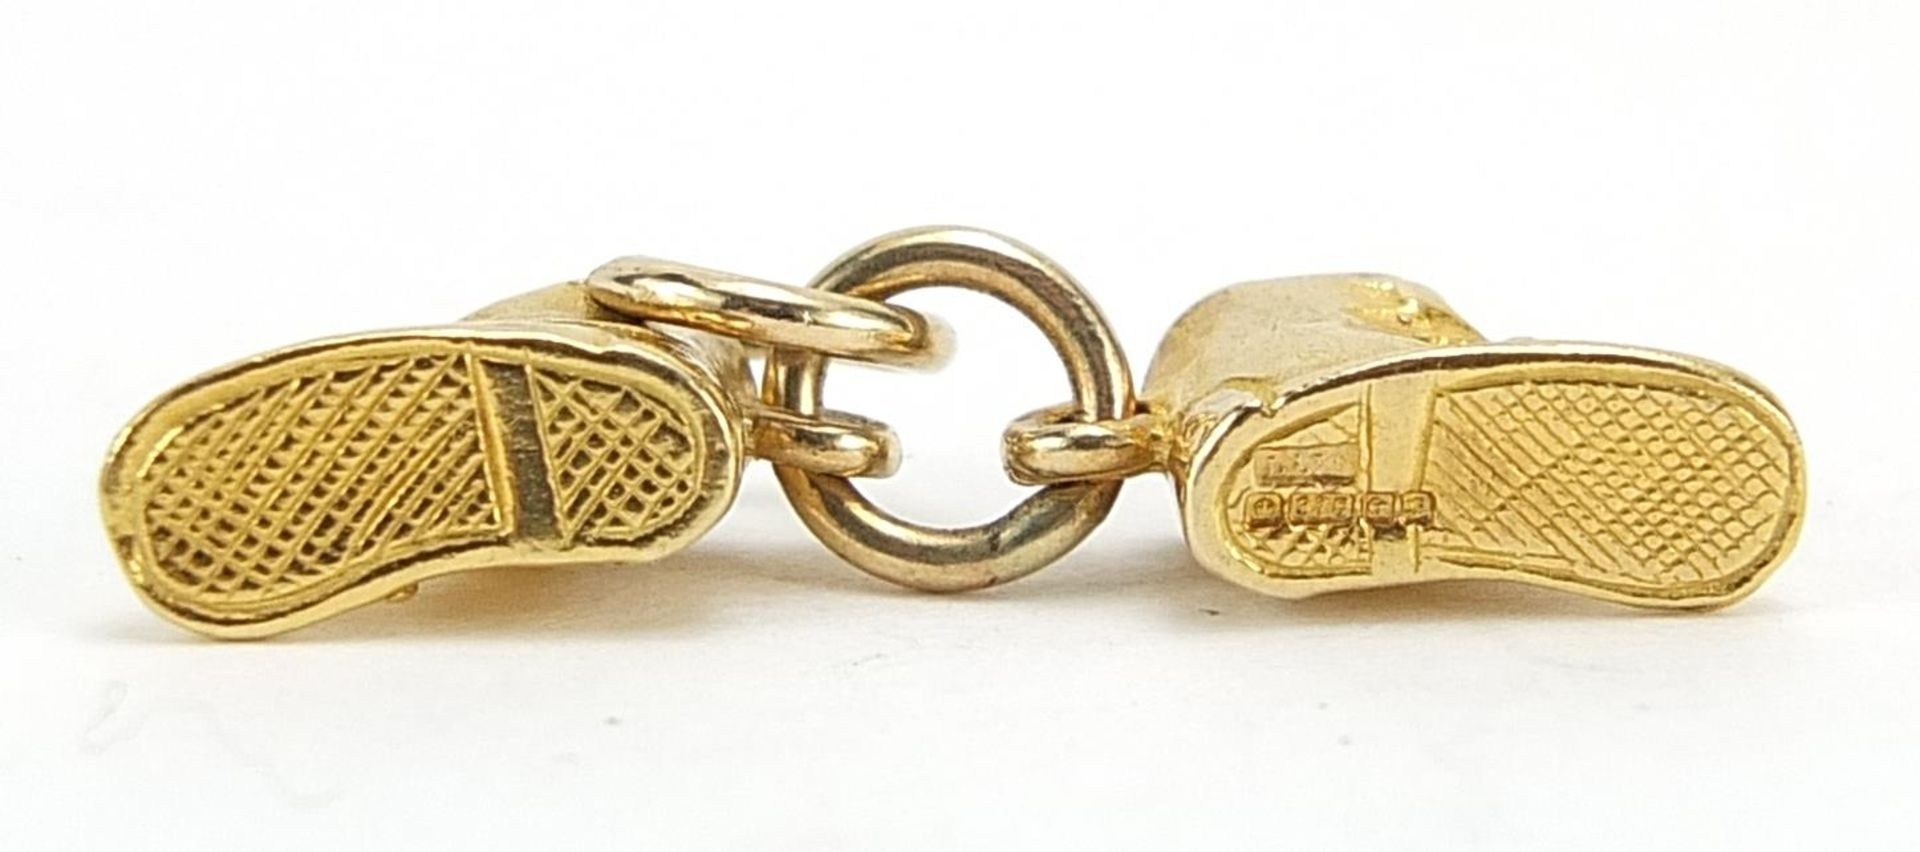 9ct gold shoes charm, 1.6cm wide, 2.3g - Image 3 of 4